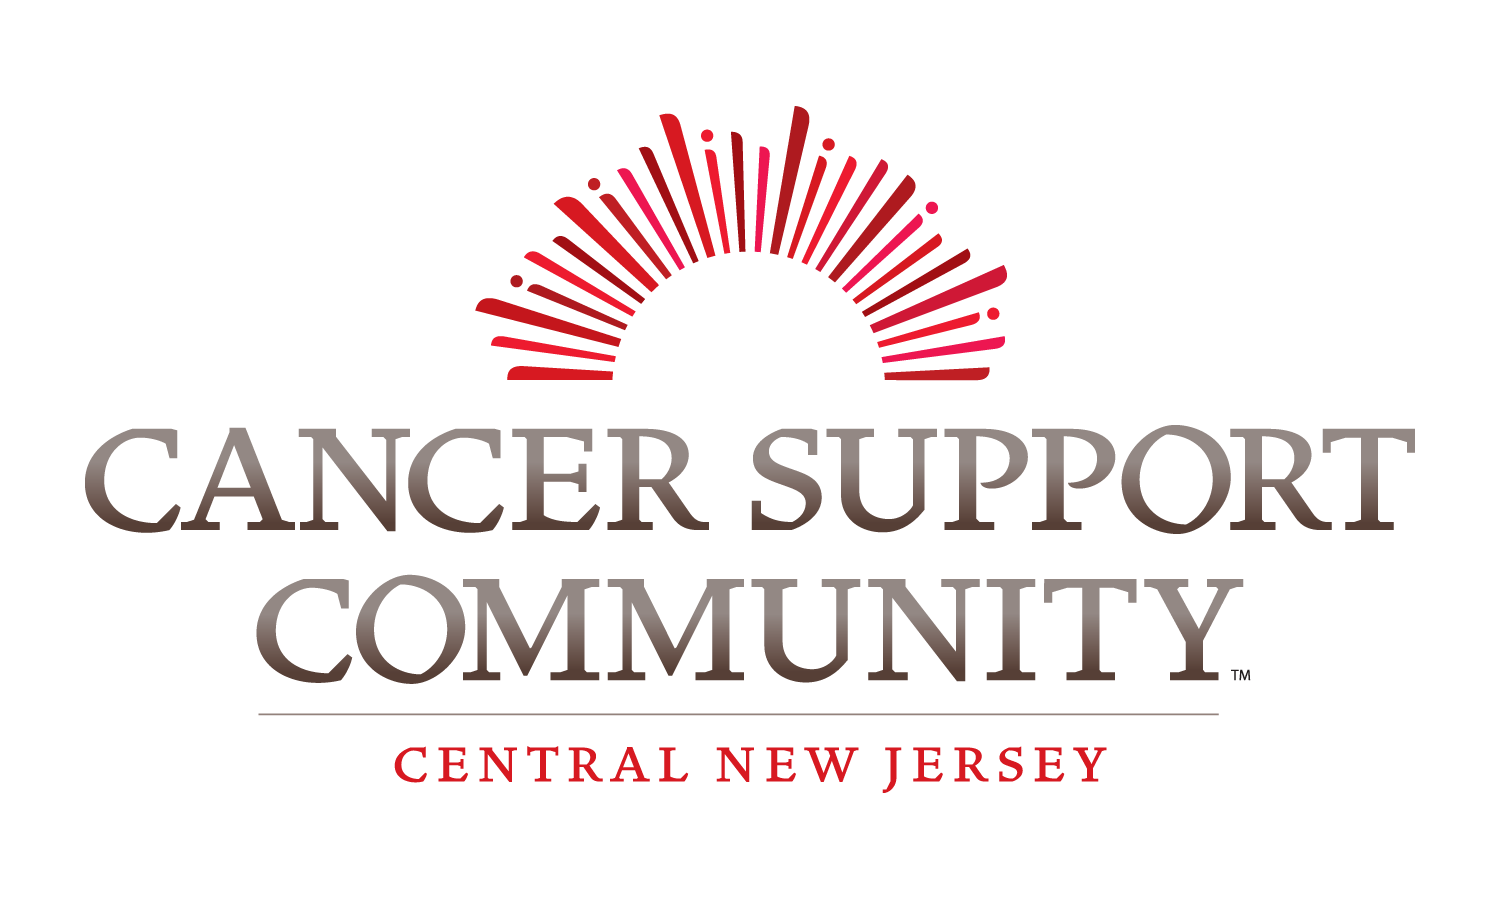 Cancer Support Community Central New Jersey